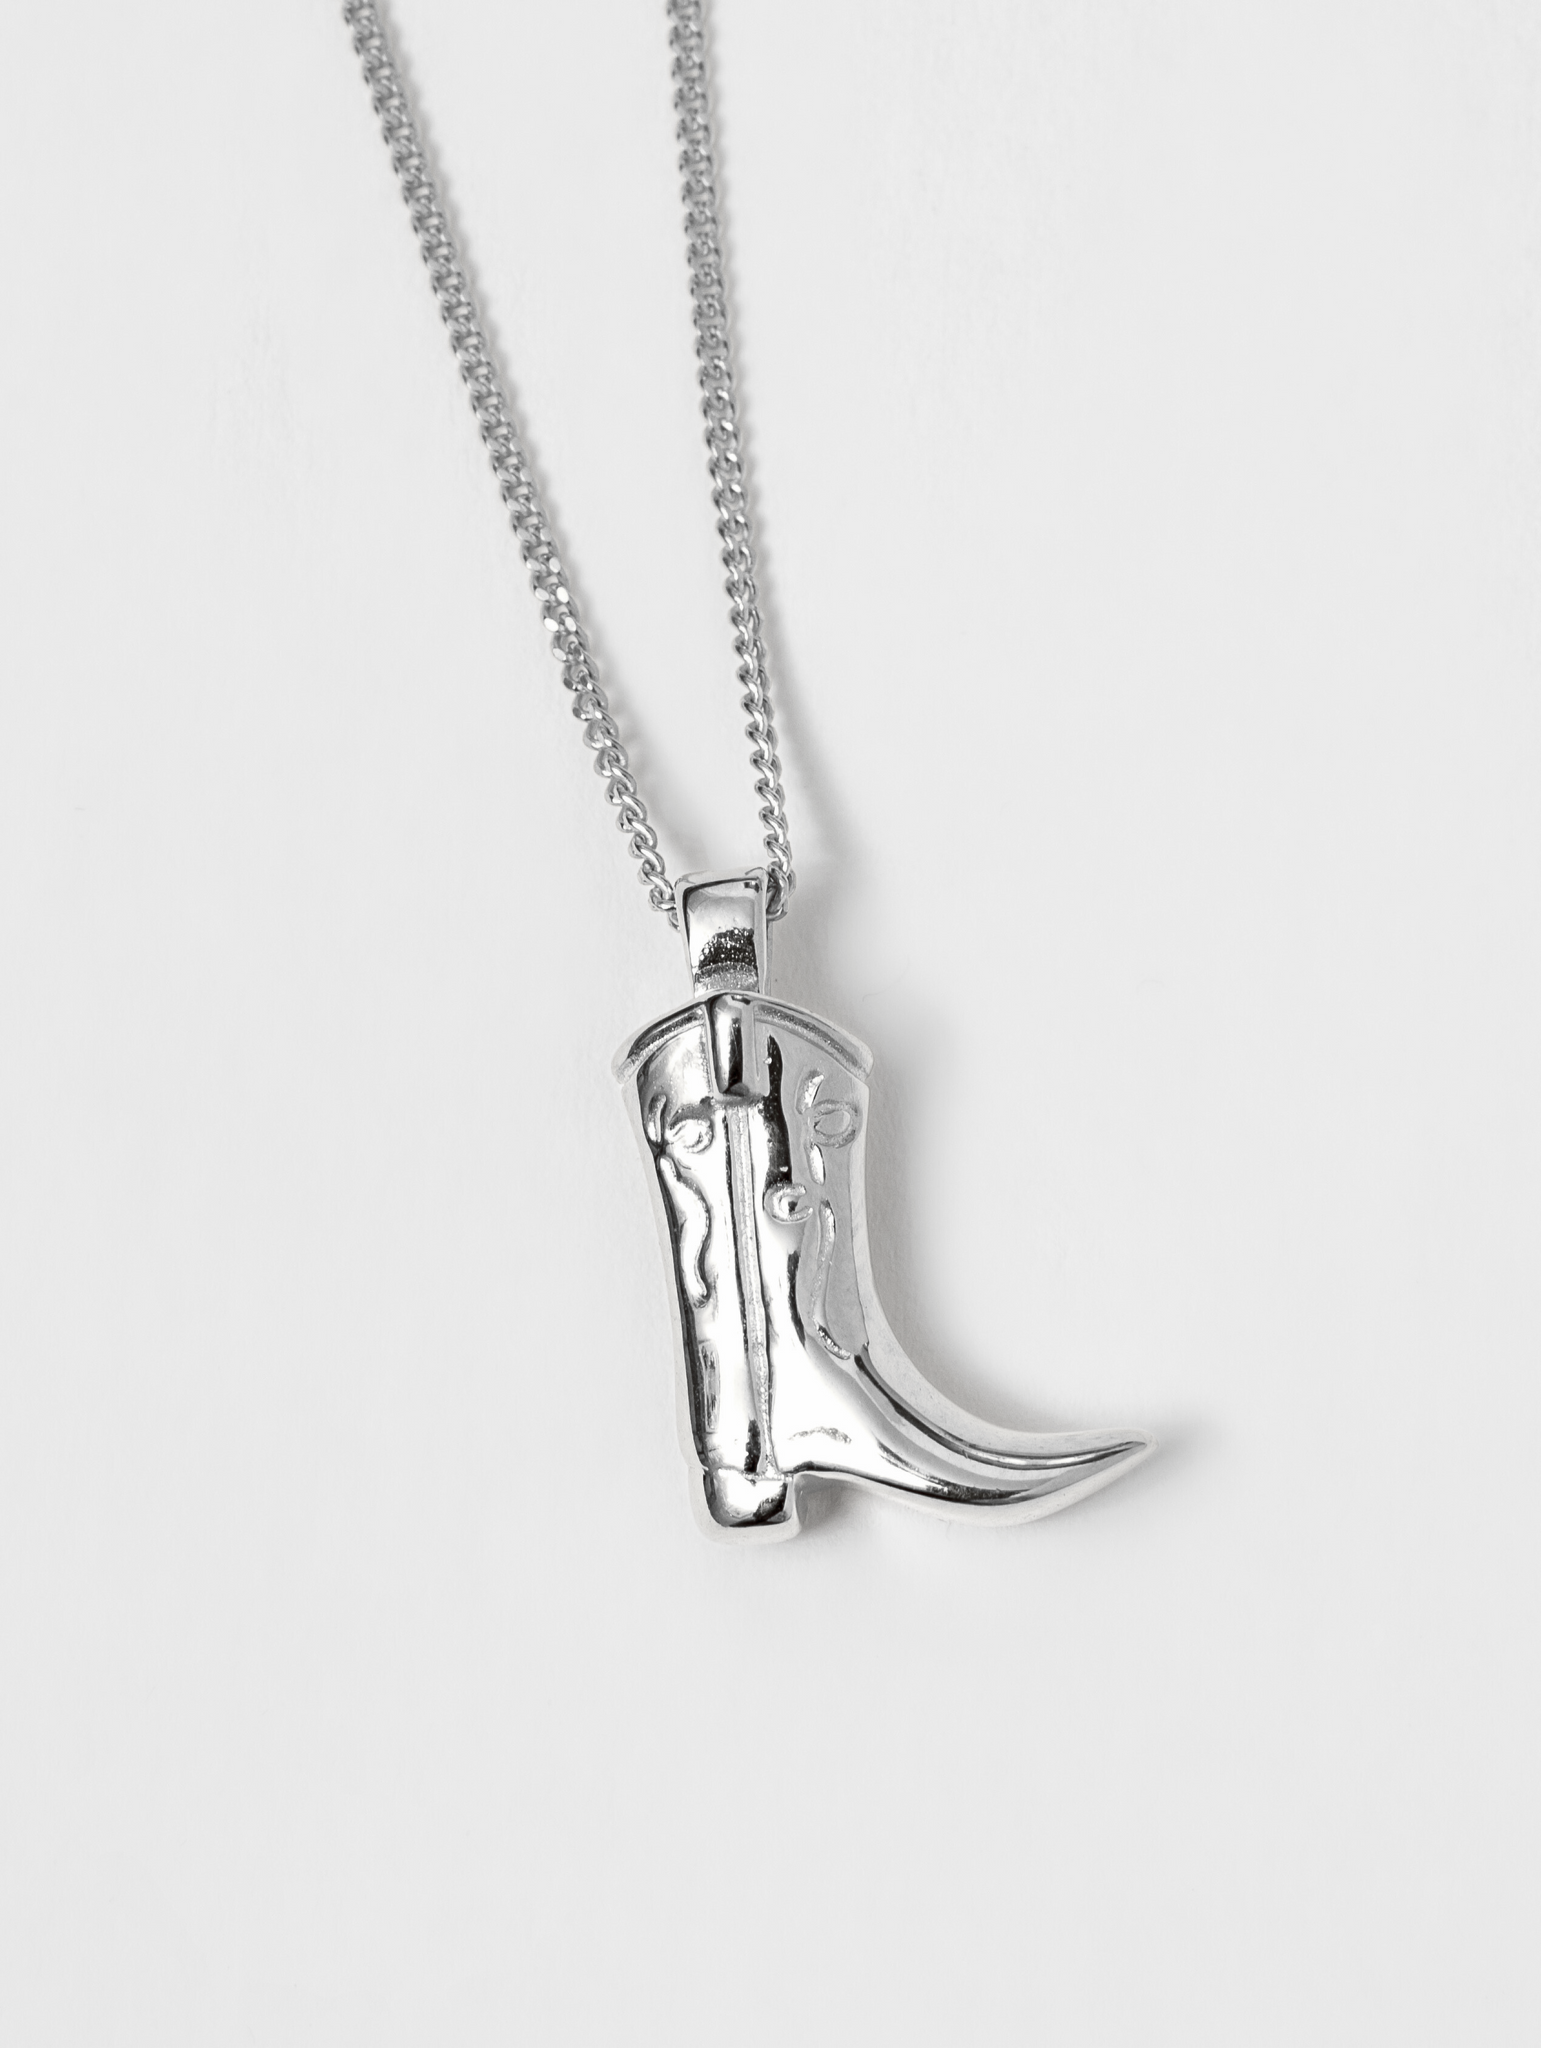 Cowboy Boot Charm Necklace in Sterling Silver